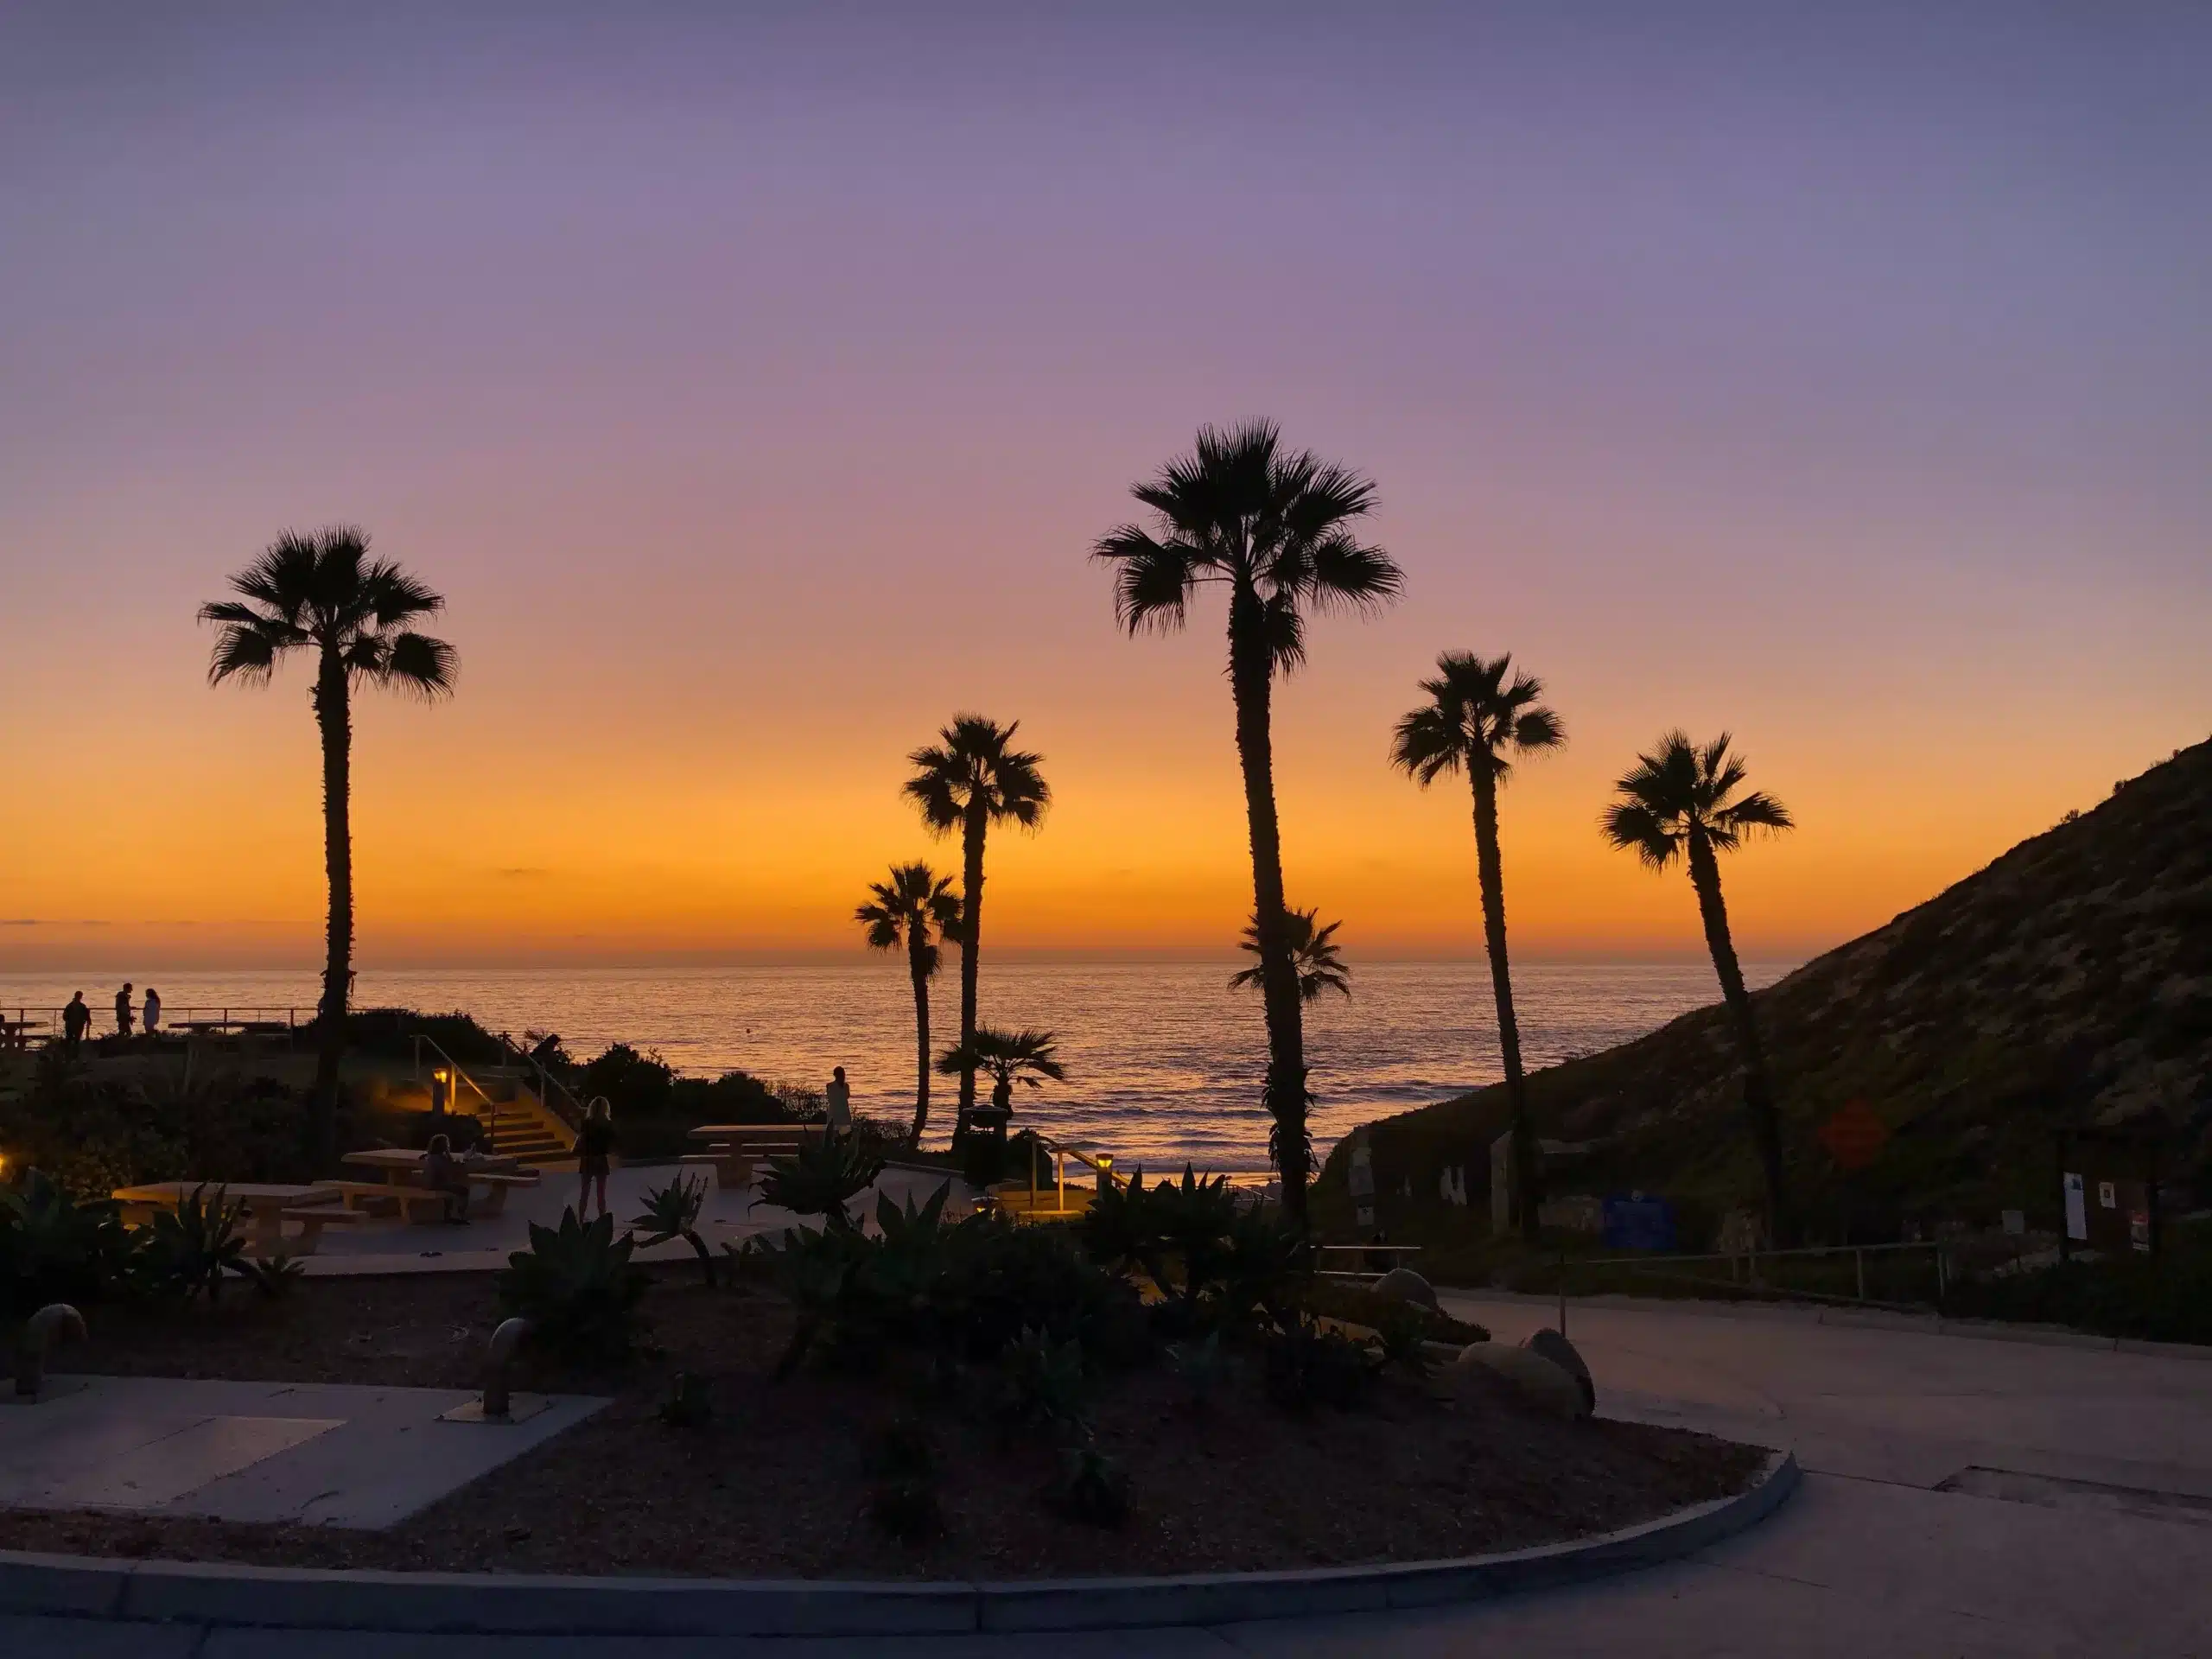 Top 5 Things to Do in Solana Beach